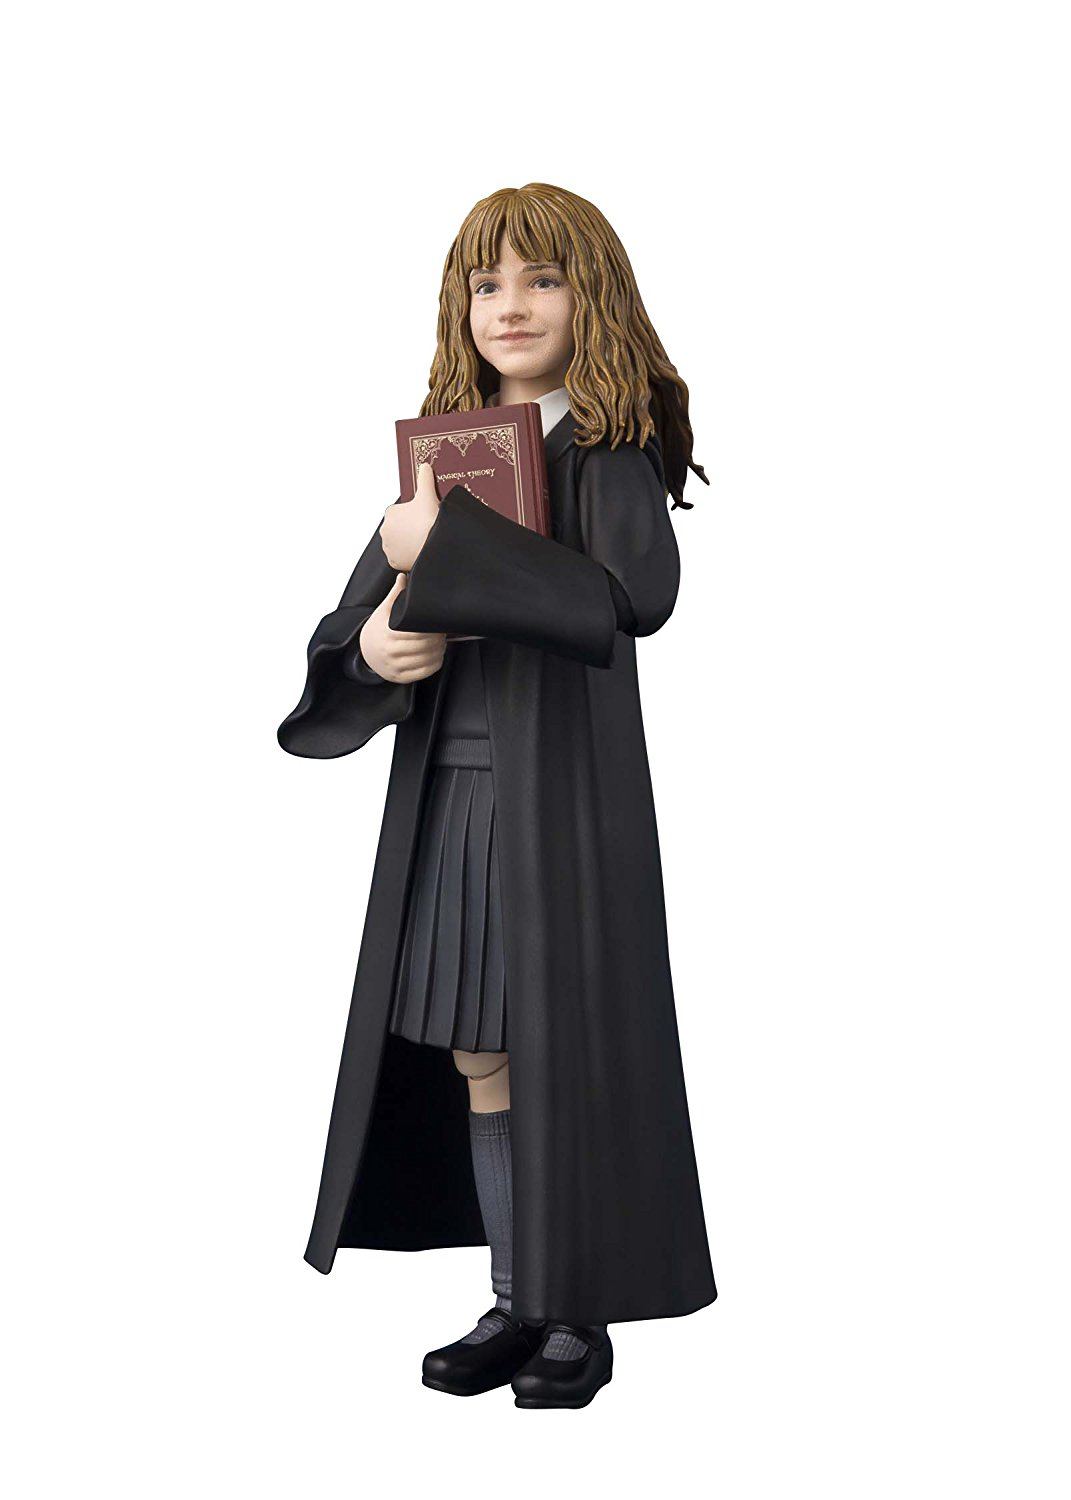 S.H.FIGUARTS HARRY POTTER AND THE PHILOSOPHER'S STONE: HERMIONE GRANGER Tamashii (Bandai Toys)